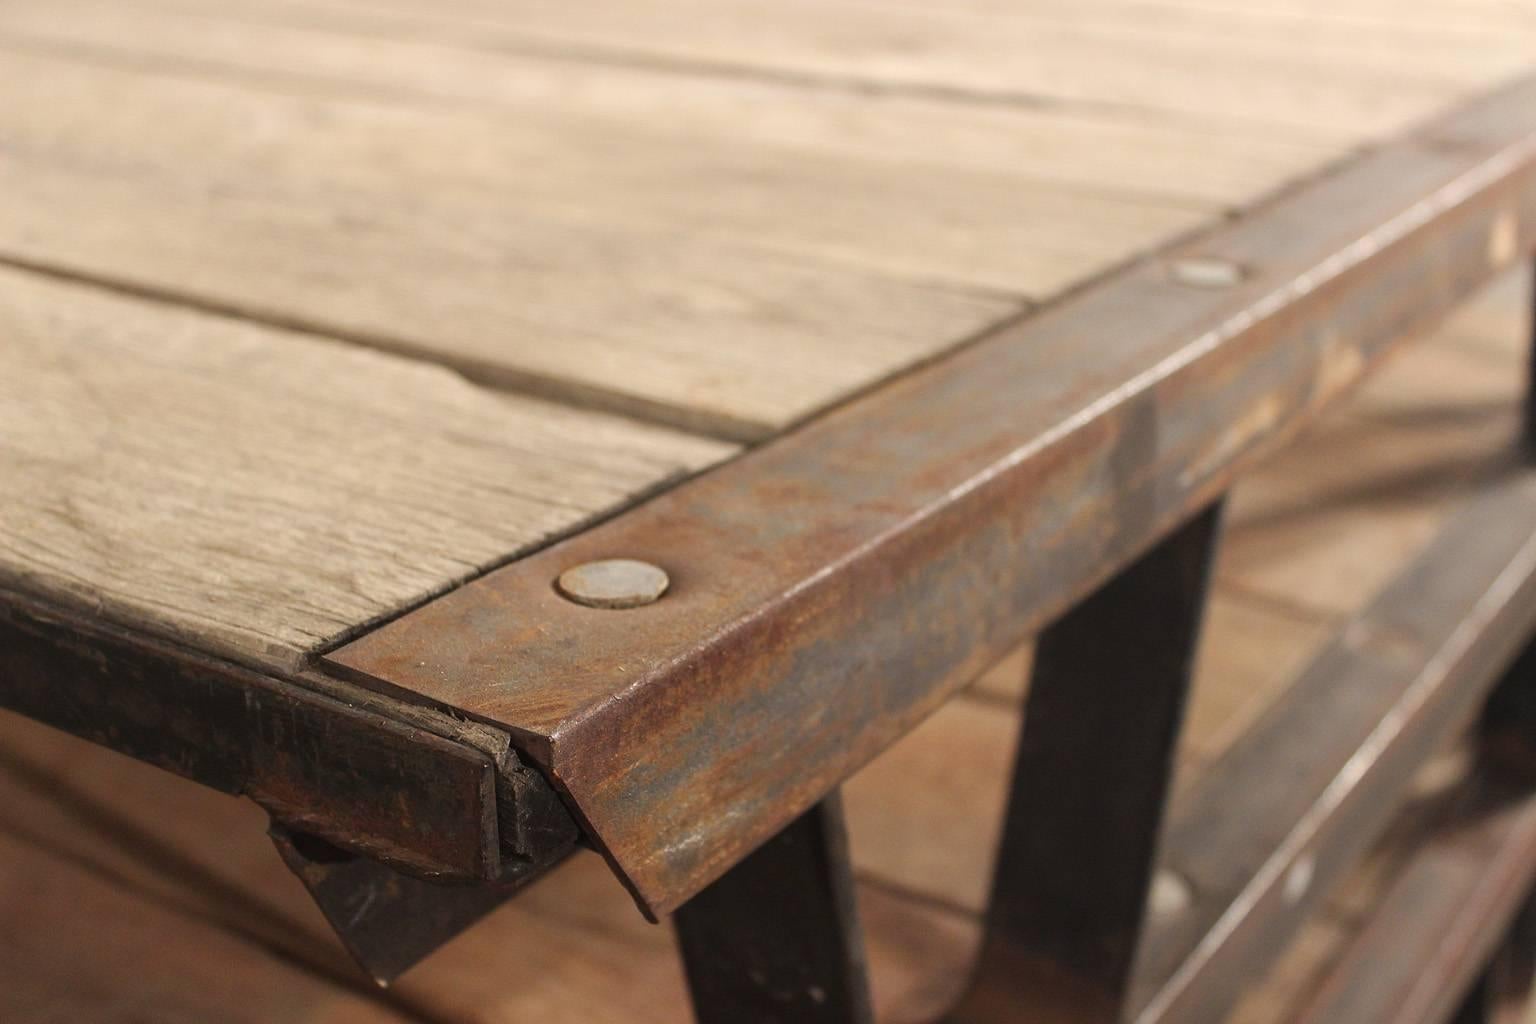 Industrial wooden pallets with iron rustic frame. Make wonderful coffee tables. Condition is as pictured. Over 100 available. Priced per item. These should be easy to ship, they are pallets you know!

These circa 1930's industrial wooden pallets